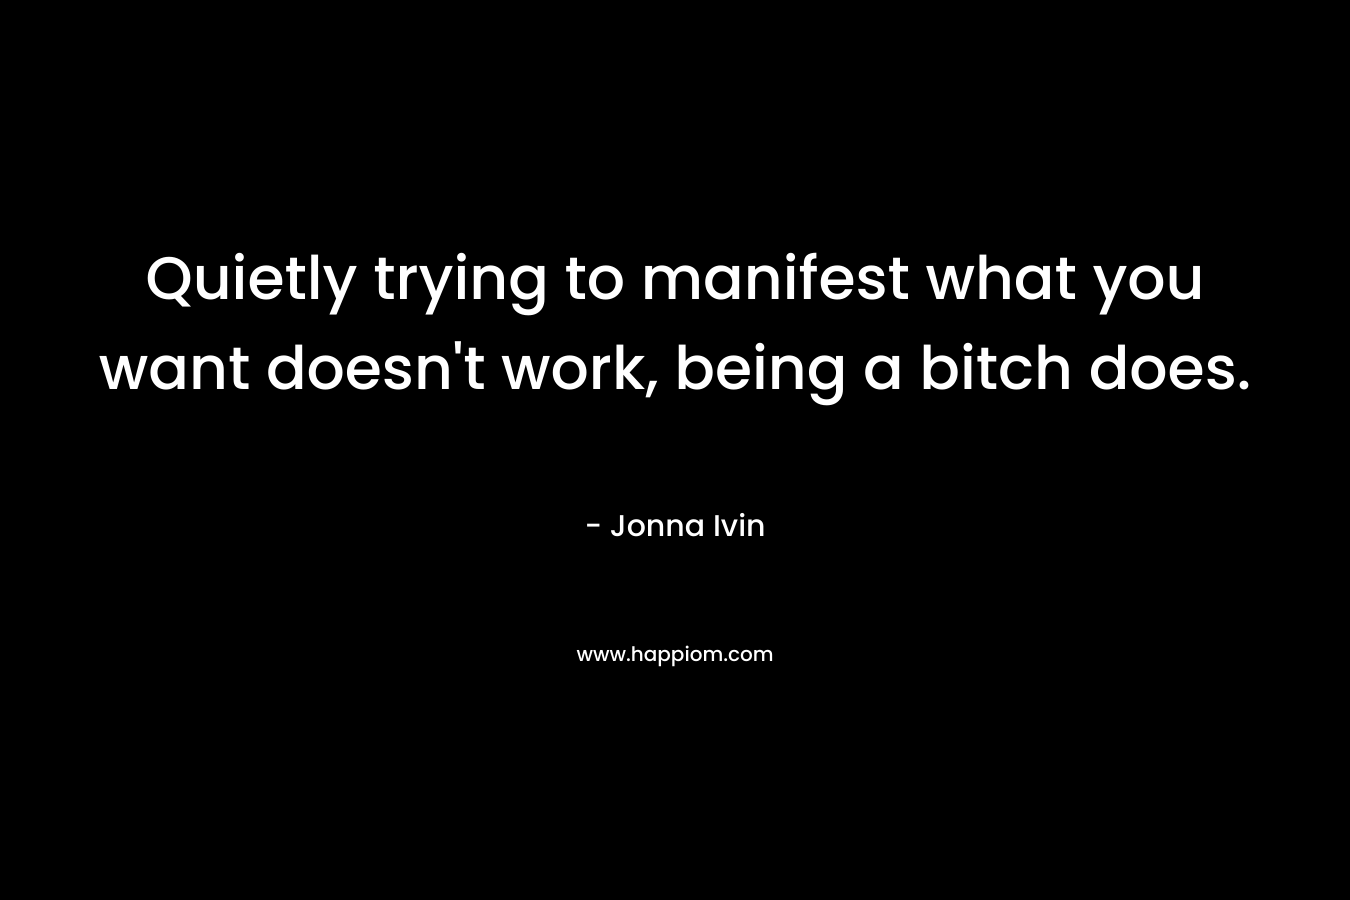 Quietly trying to manifest what you want doesn't work, being a bitch does.